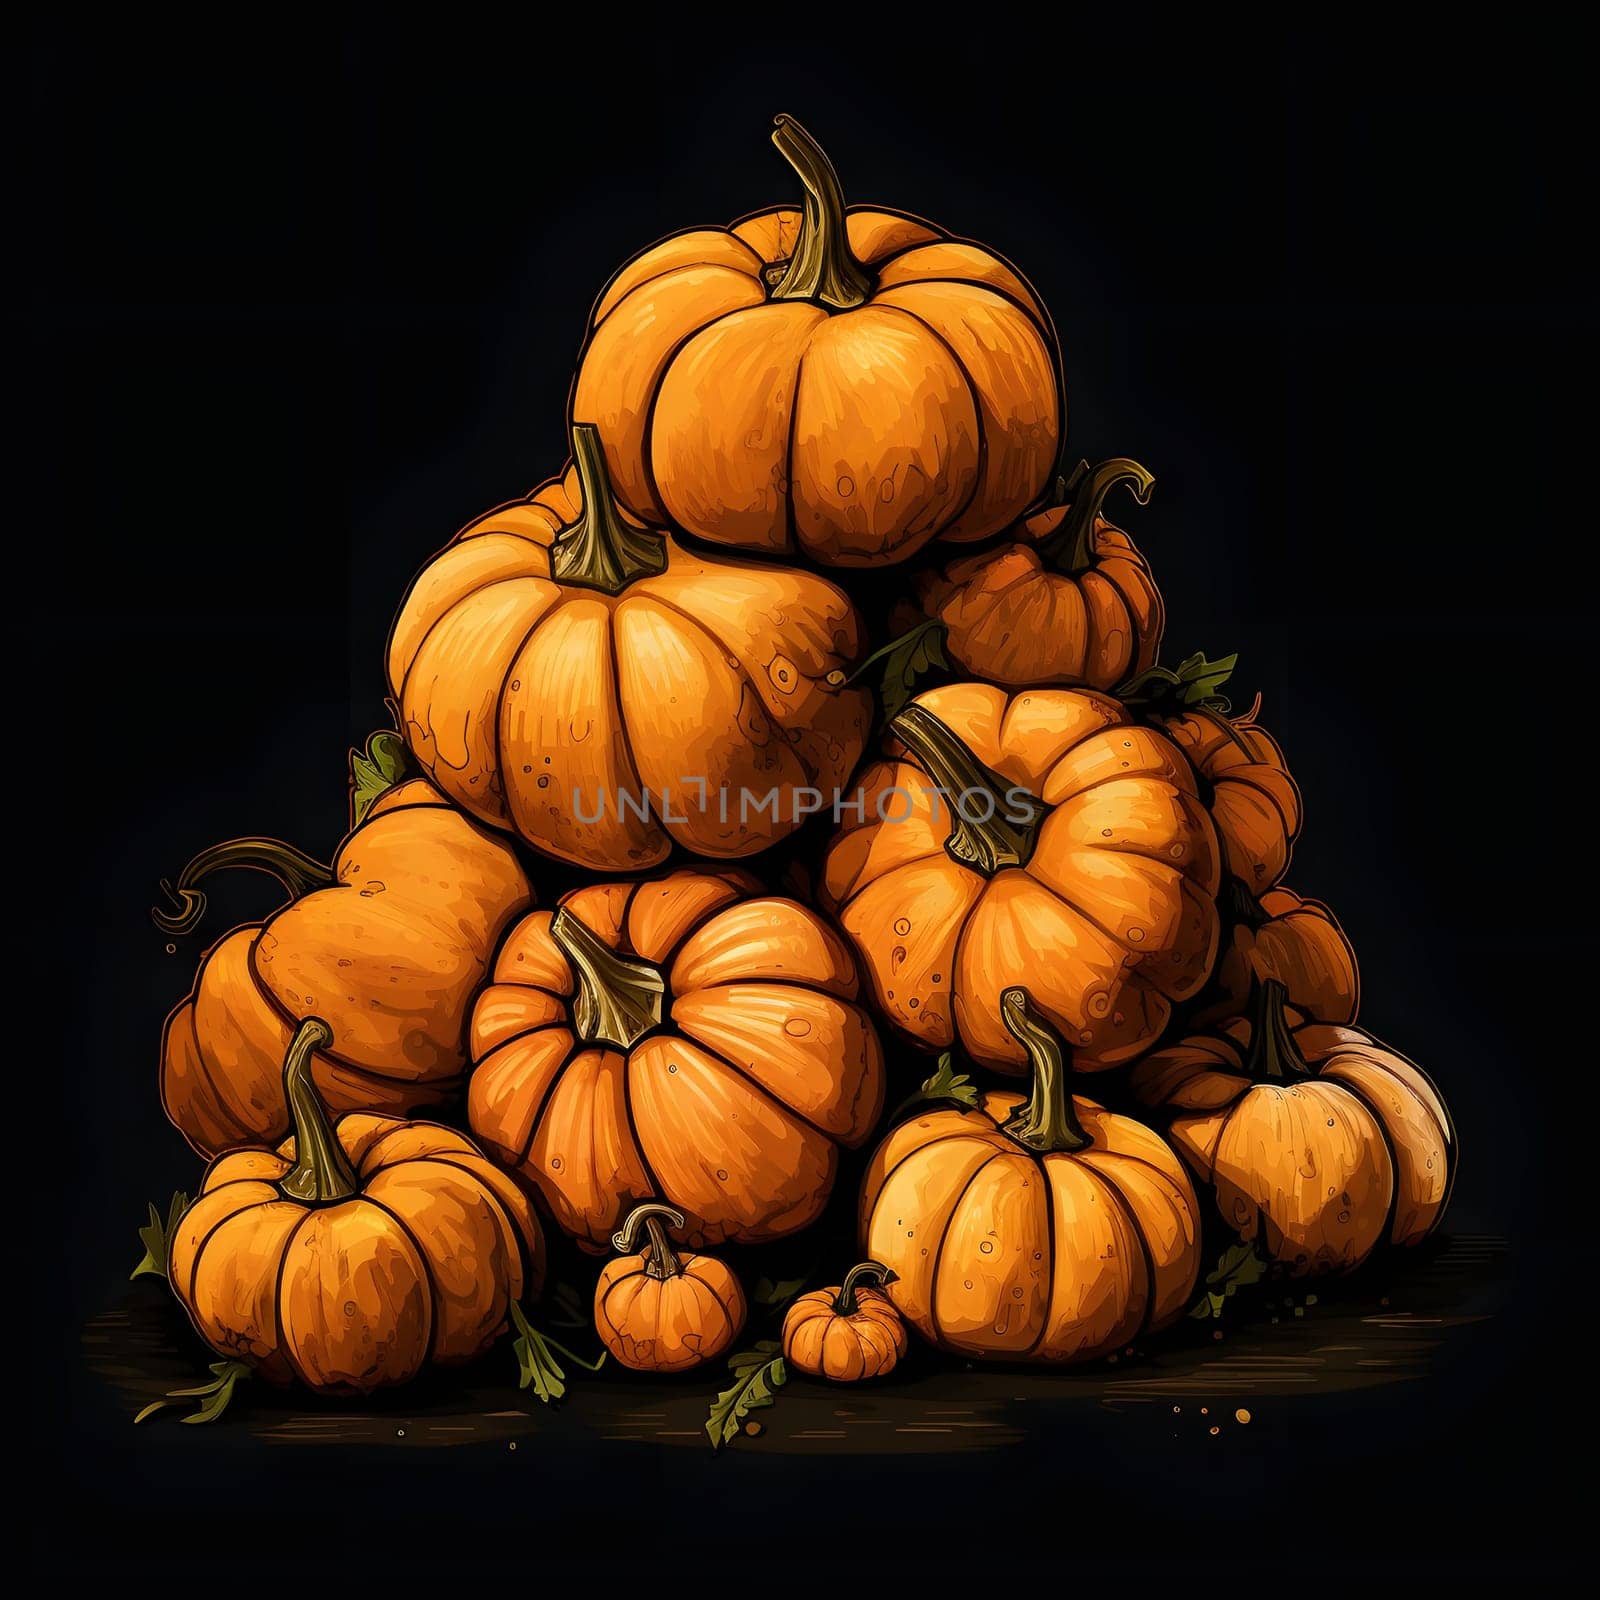 Pumpkin pile on black background. Pumpkin as a dish of thanksgiving for the harvest. An atmosphere of joy and celebration.